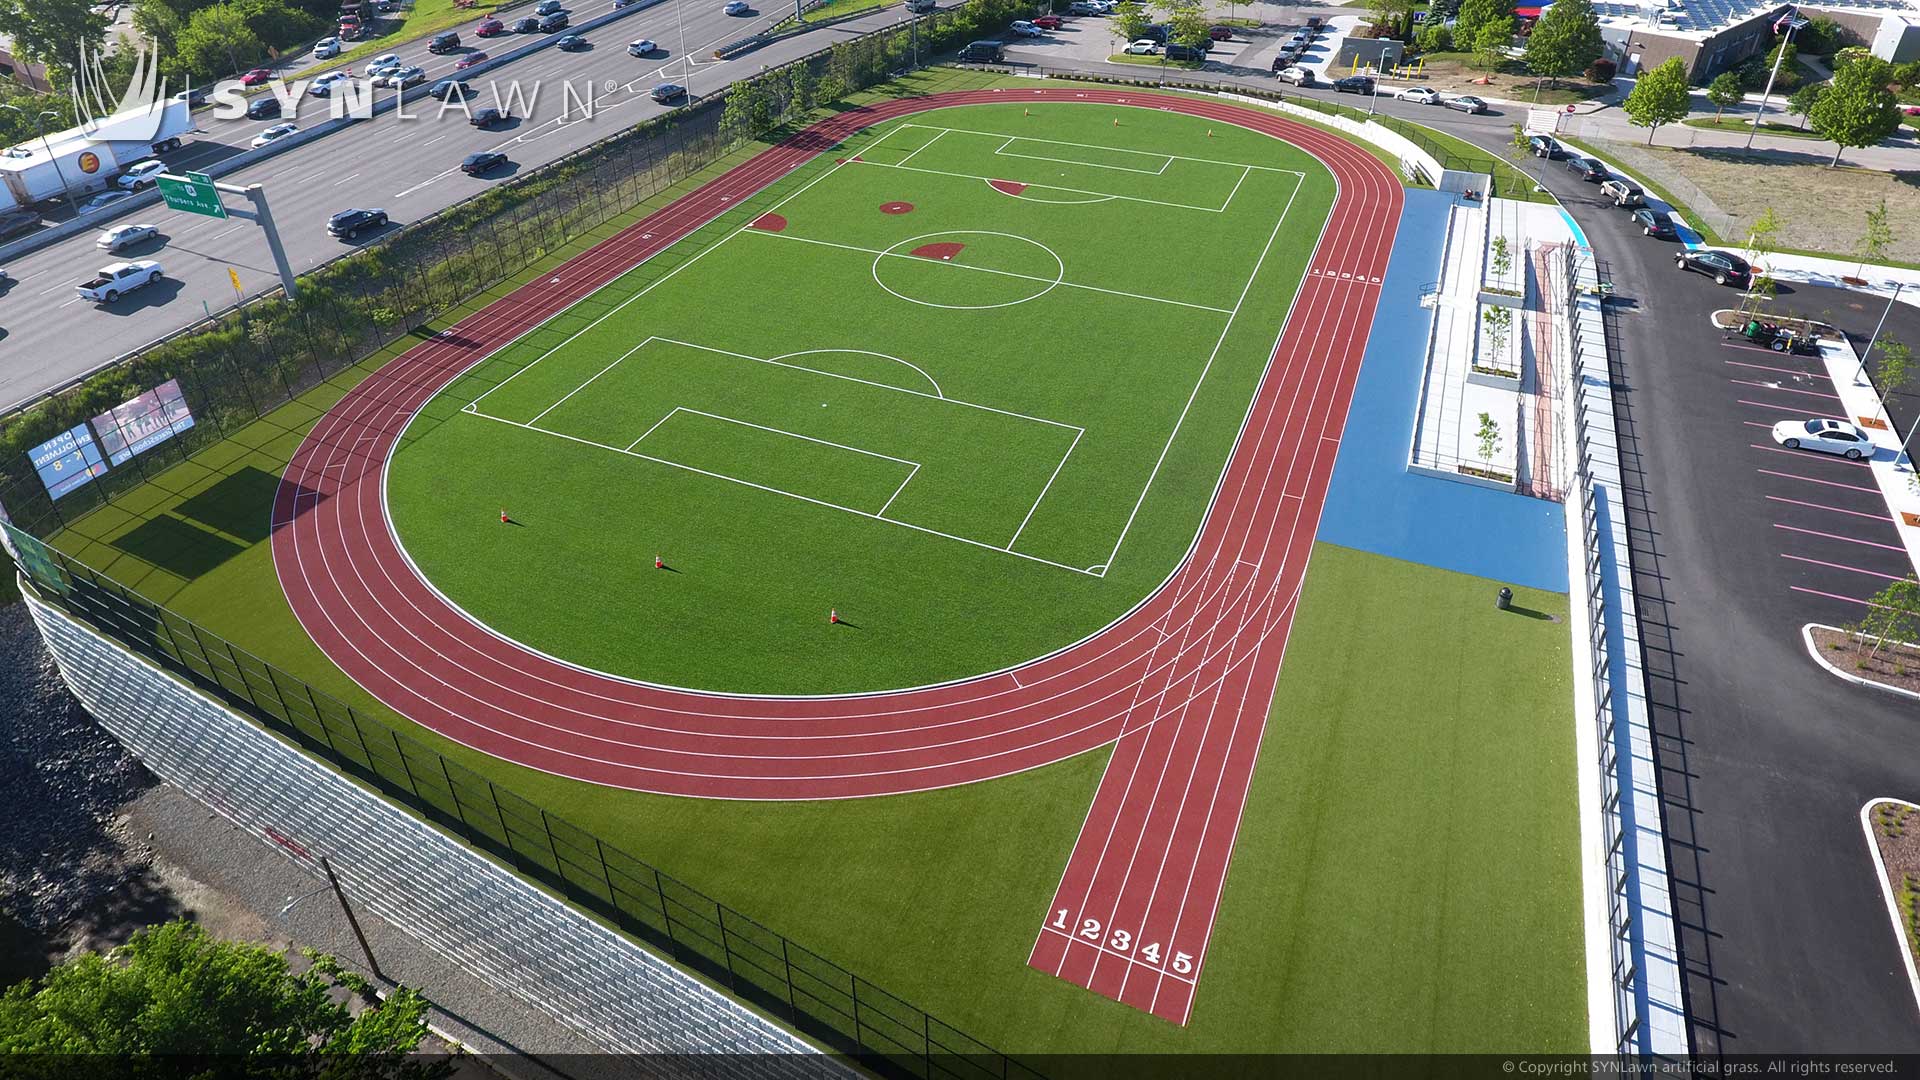 image of SYNLawn Honolulu HI sports agility artificial grass with running track and field